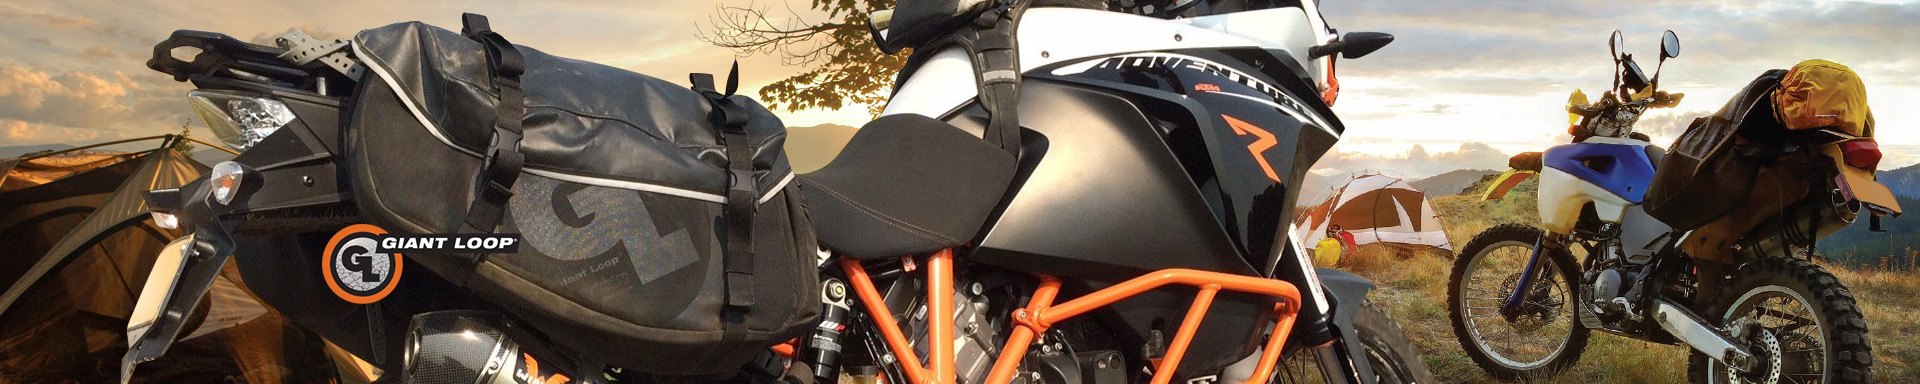 Giant Loop Luggage Systems & Saddlebags